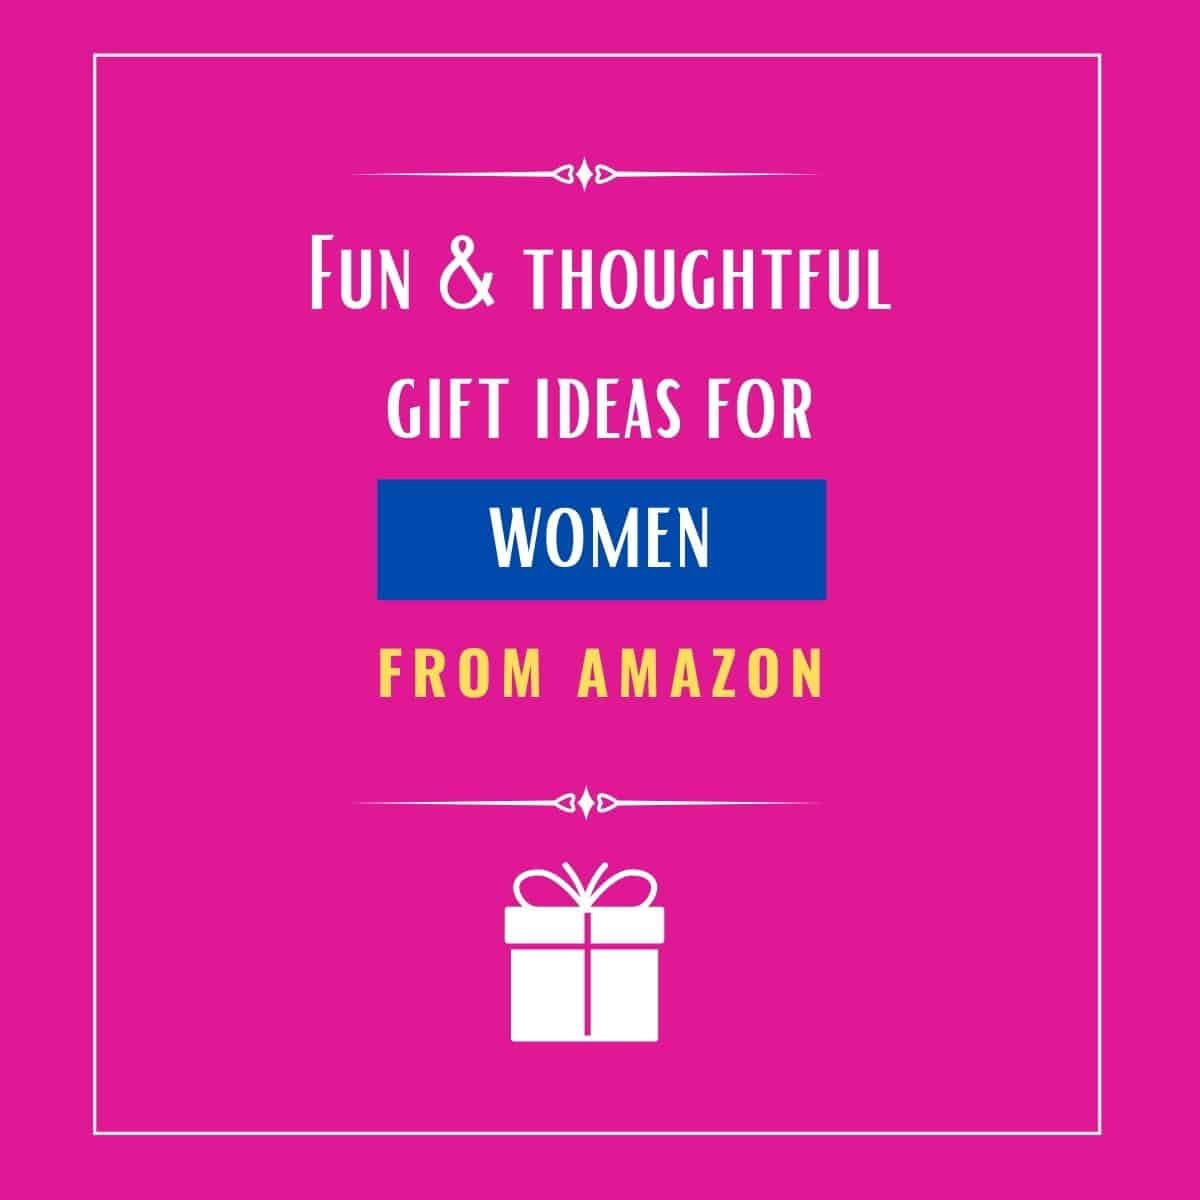 10 Fun and Thoughtful Gift Ideas for Women